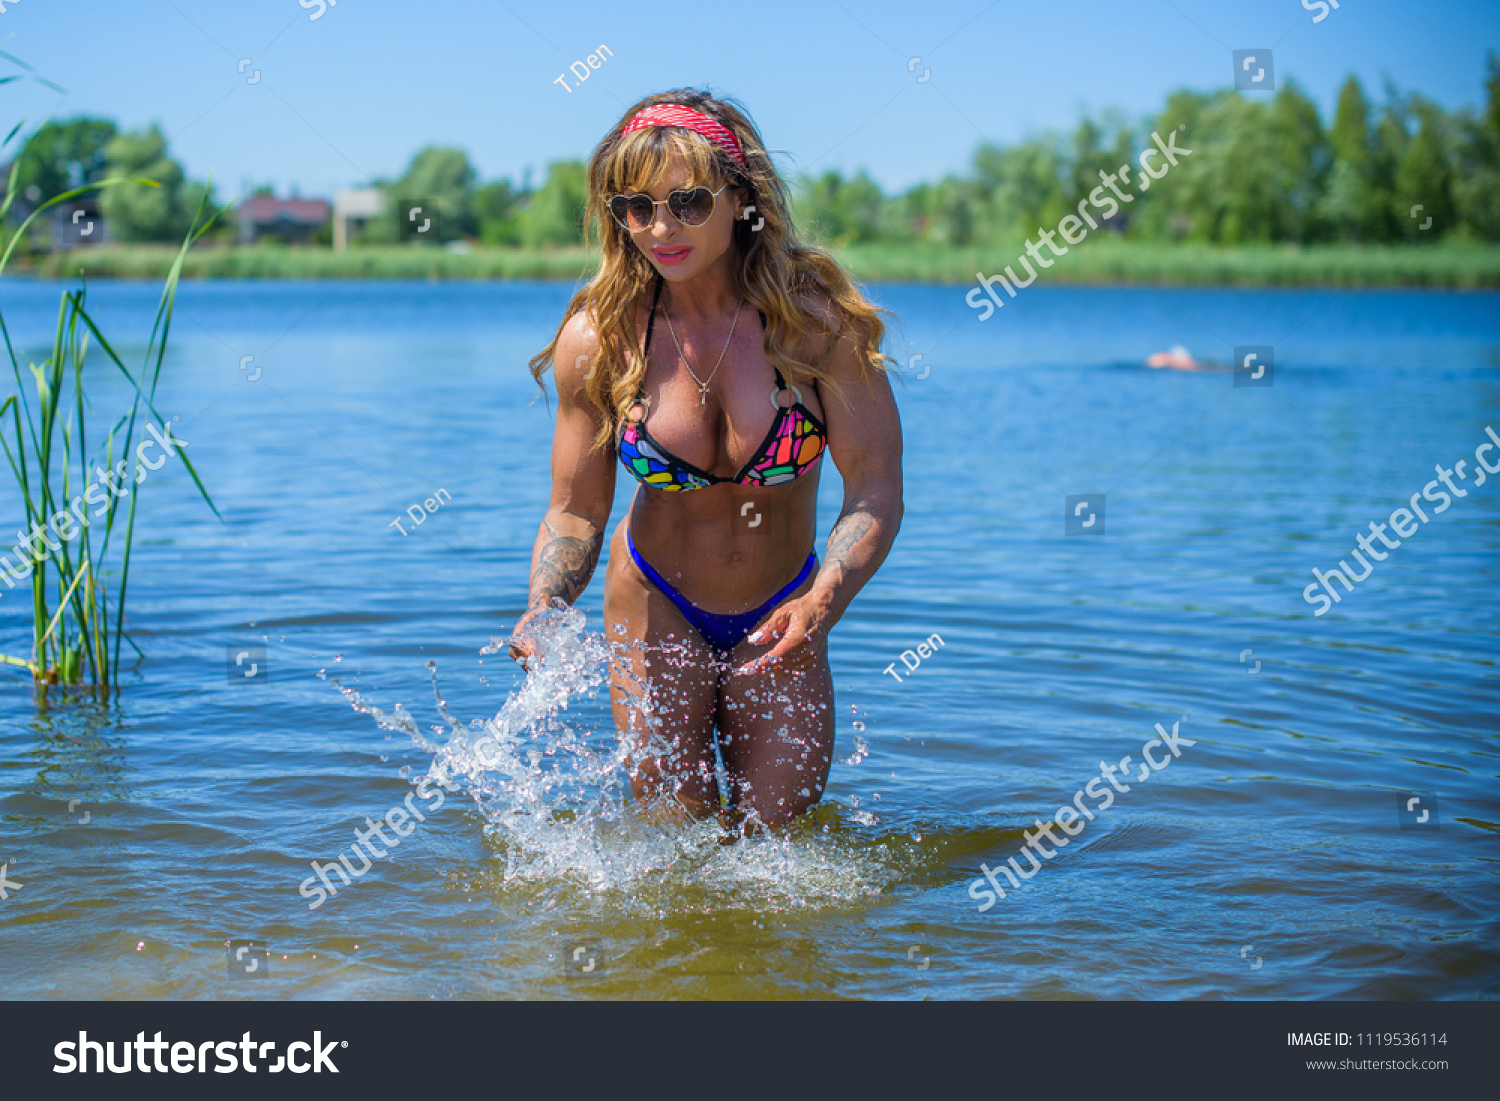 Fitness sport style bodybuilder woman on a nature. Life of mature fit woman. Lady demonstration her body with a tan #1119536114